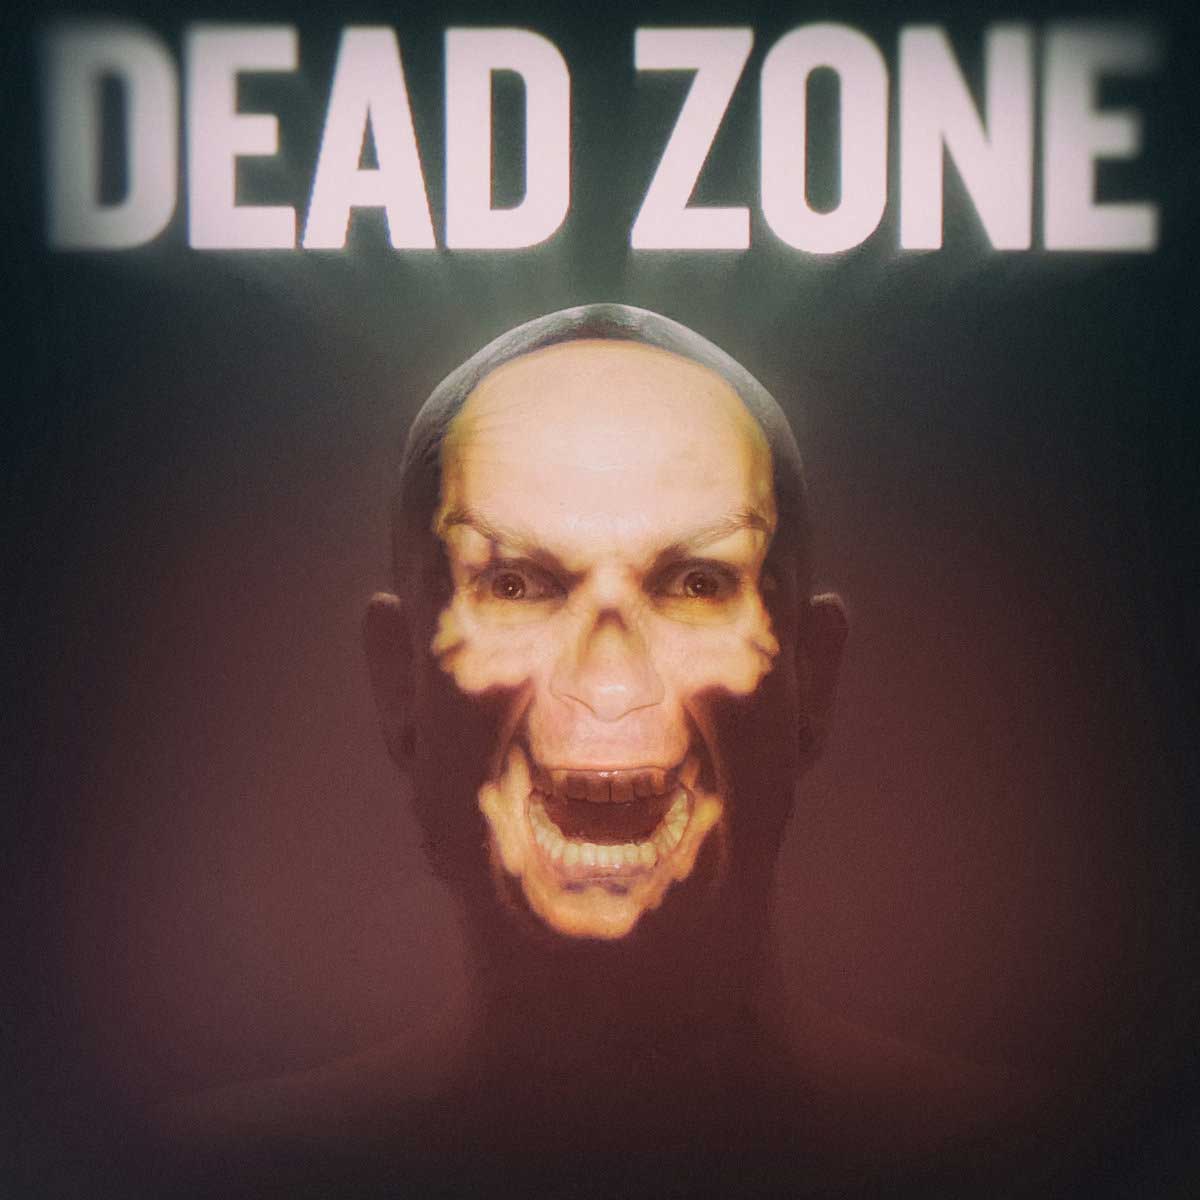 Aesthetic Perfection - Dead Zone - Aesthetic Perfection - Dead Zone